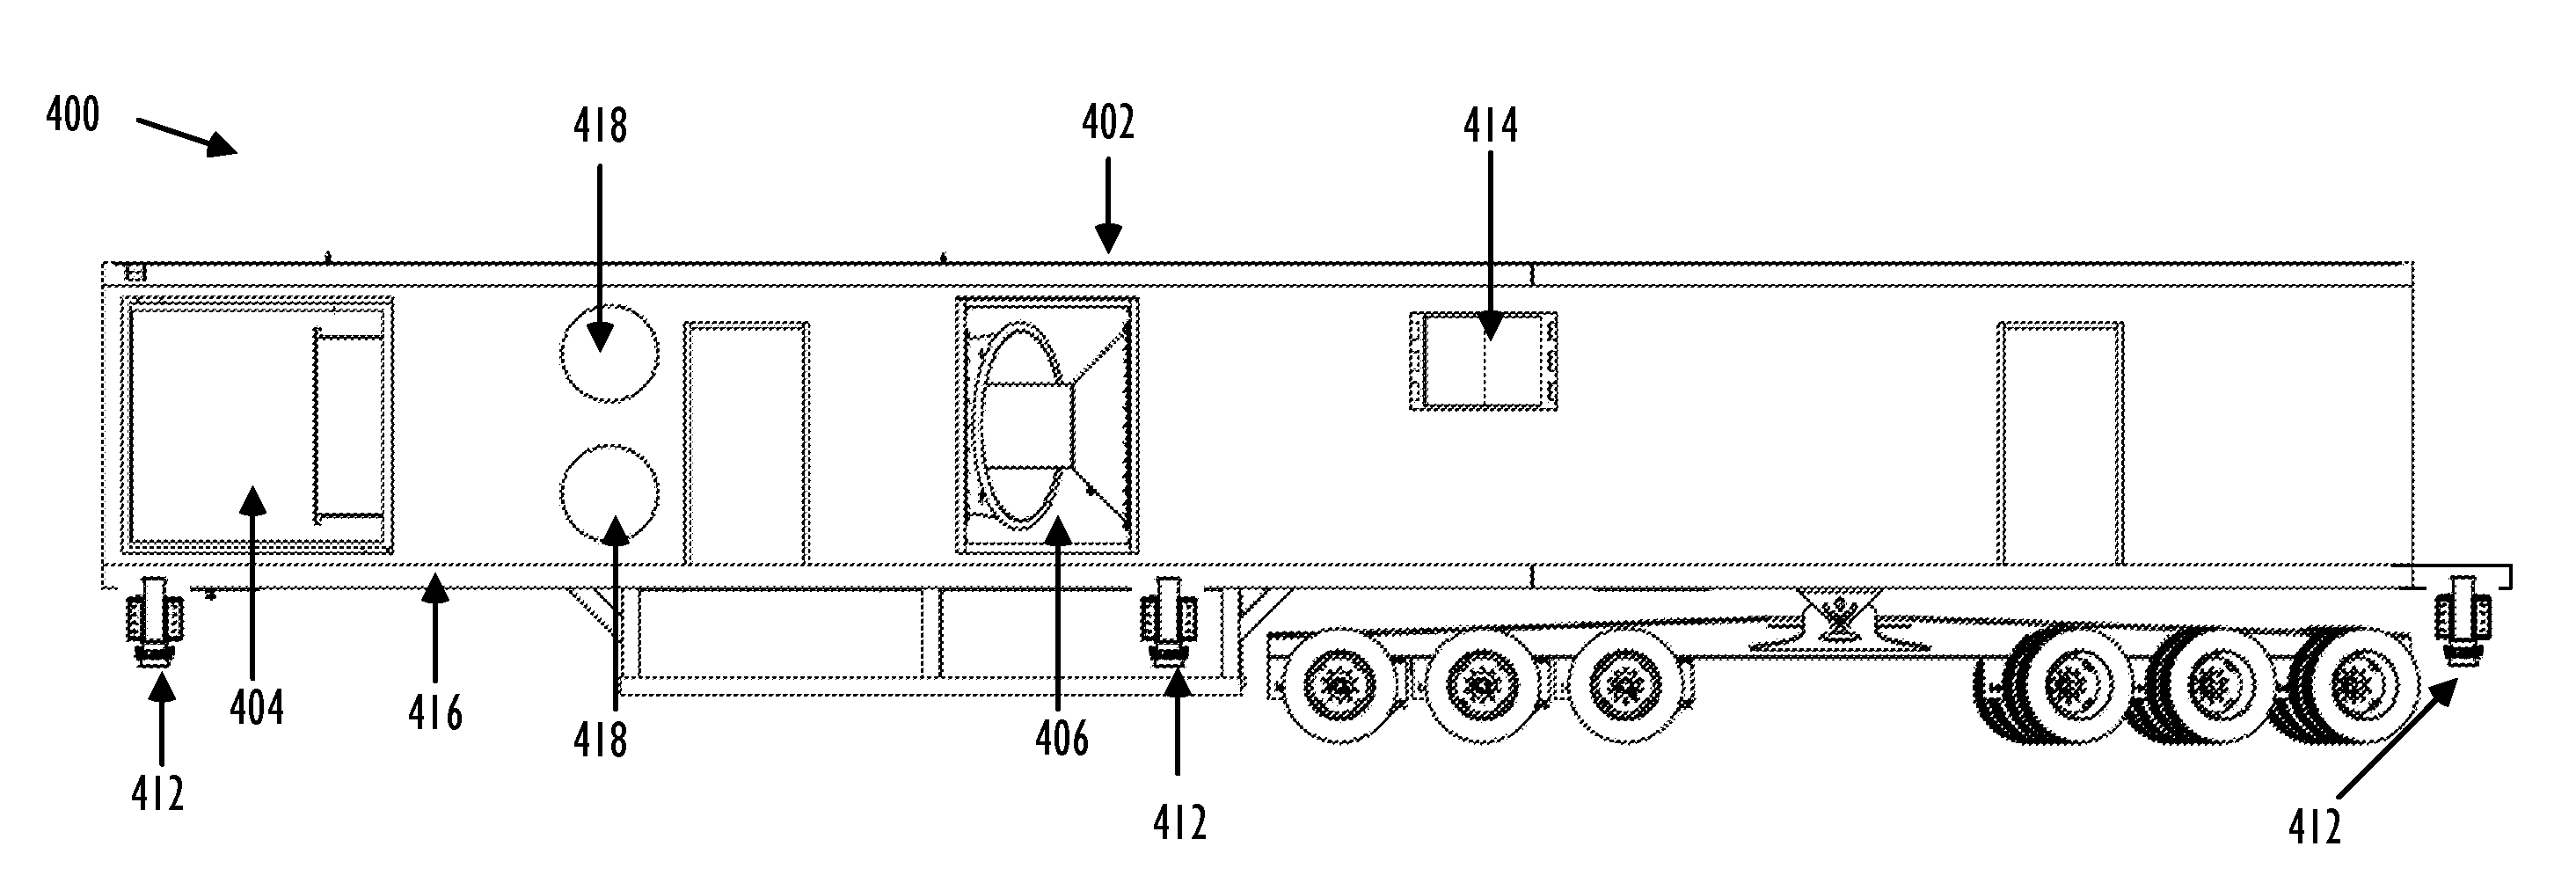 Mobile fracturing pump transport for hydraulic fracturing of subsurface geological formations